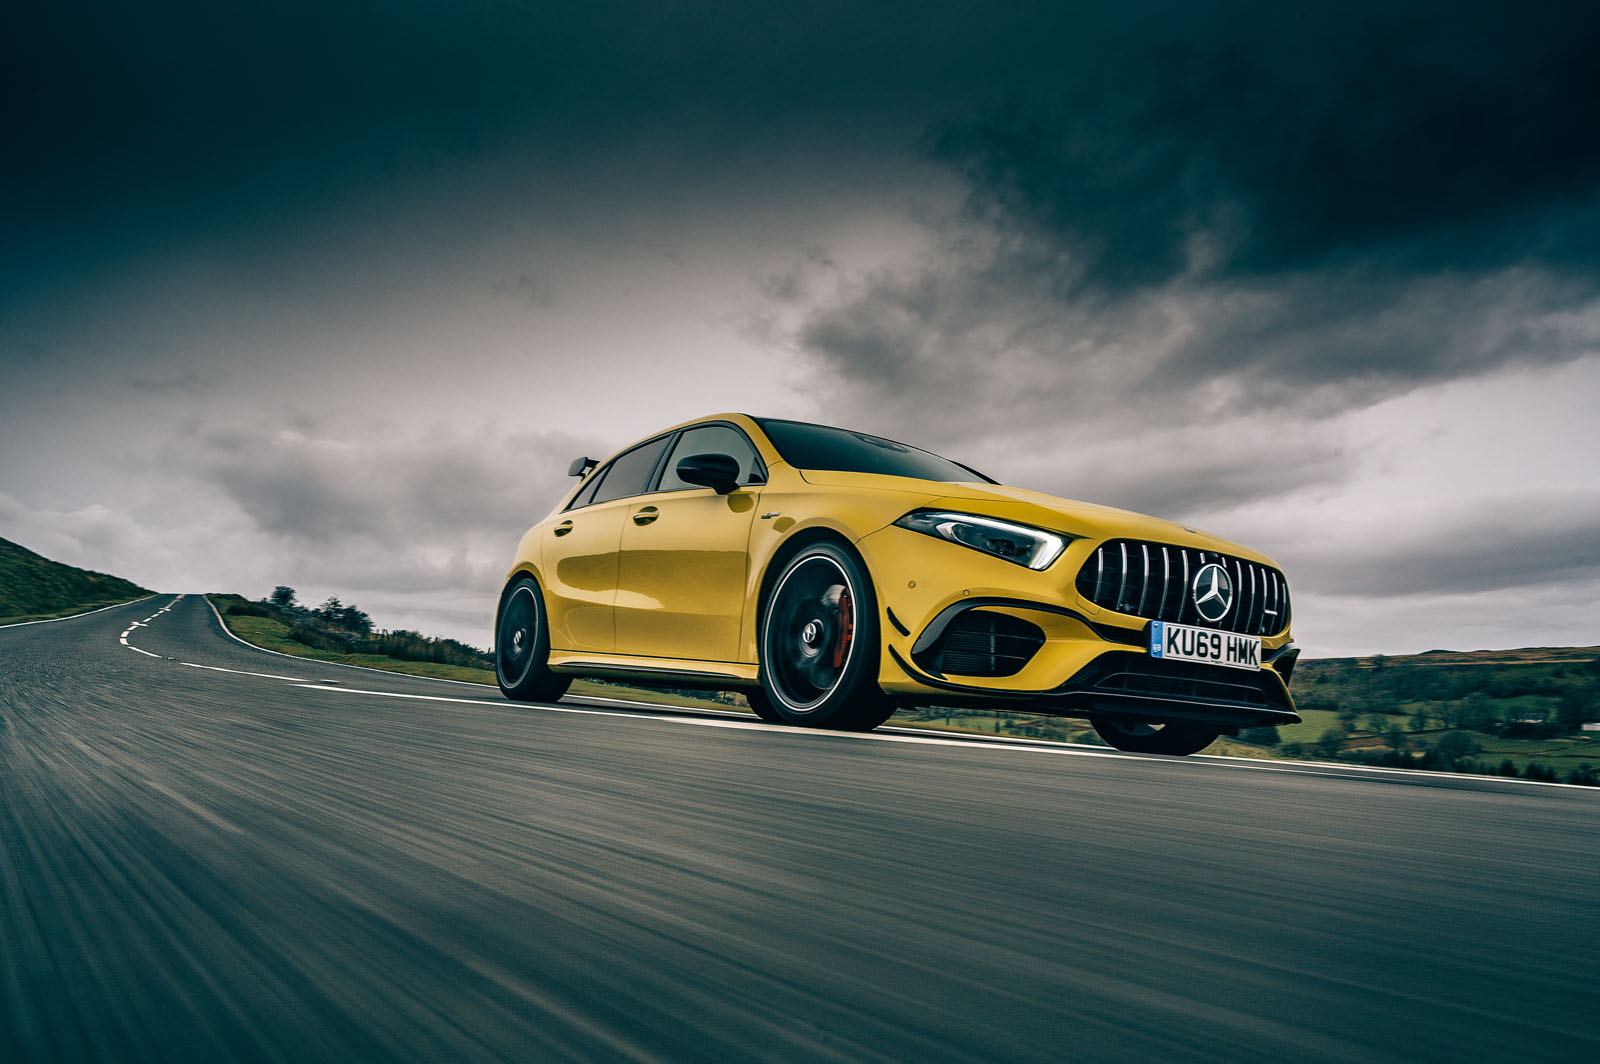 Mercedes-AMG A45 S 4Matic+ 2020 road test review - on the road dark